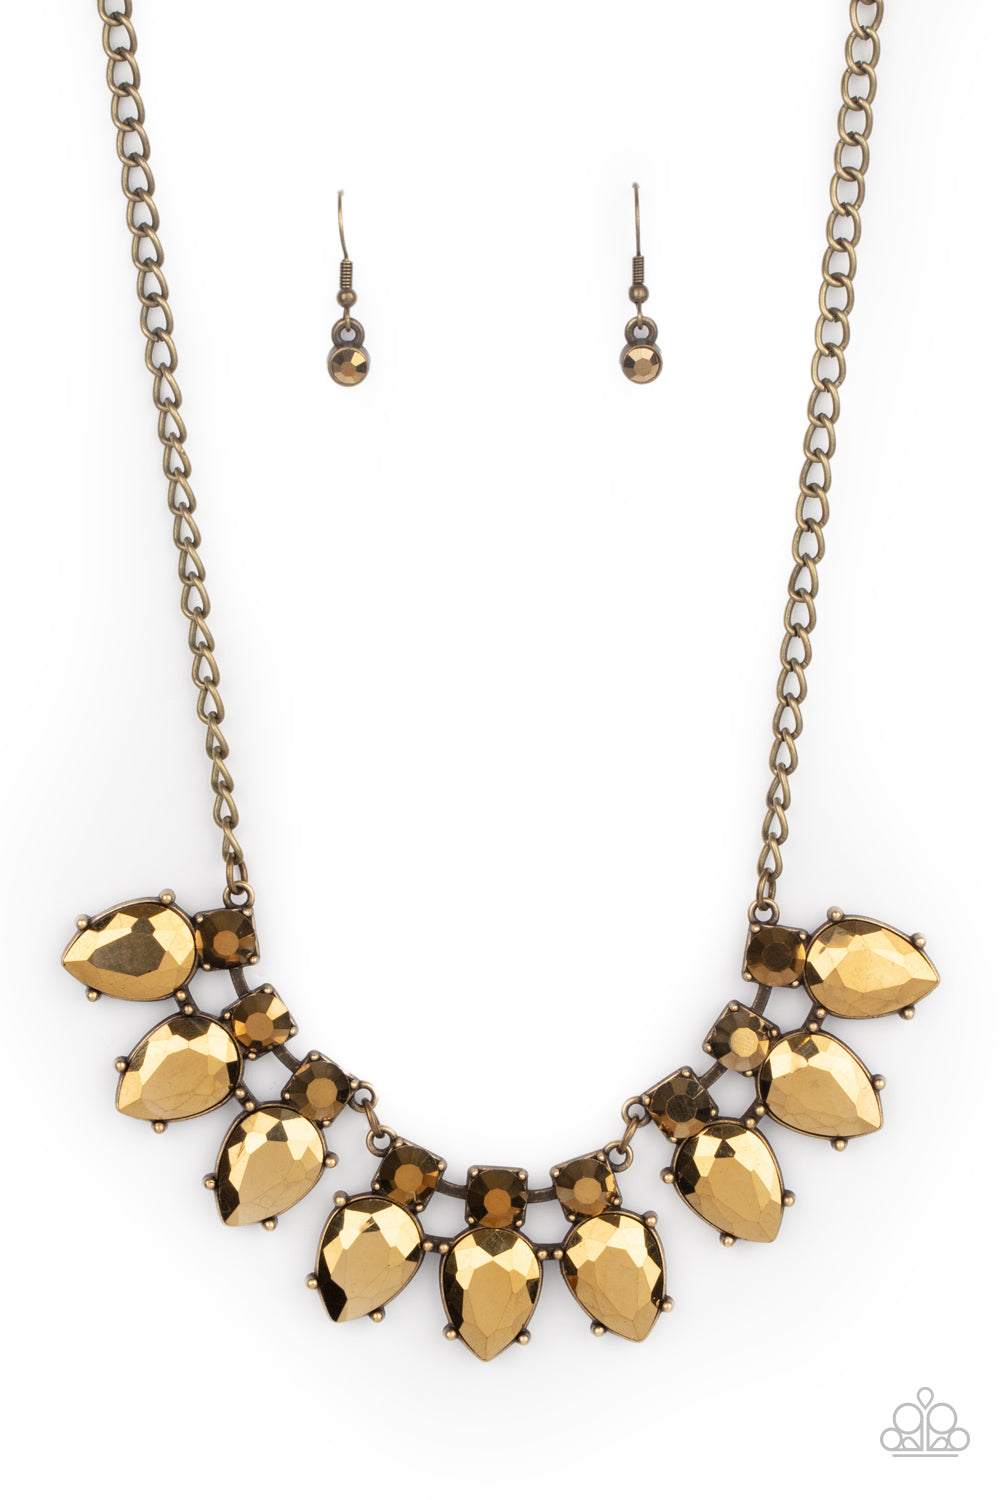 Paparazzi Necklaces Extra Enticing - Brass